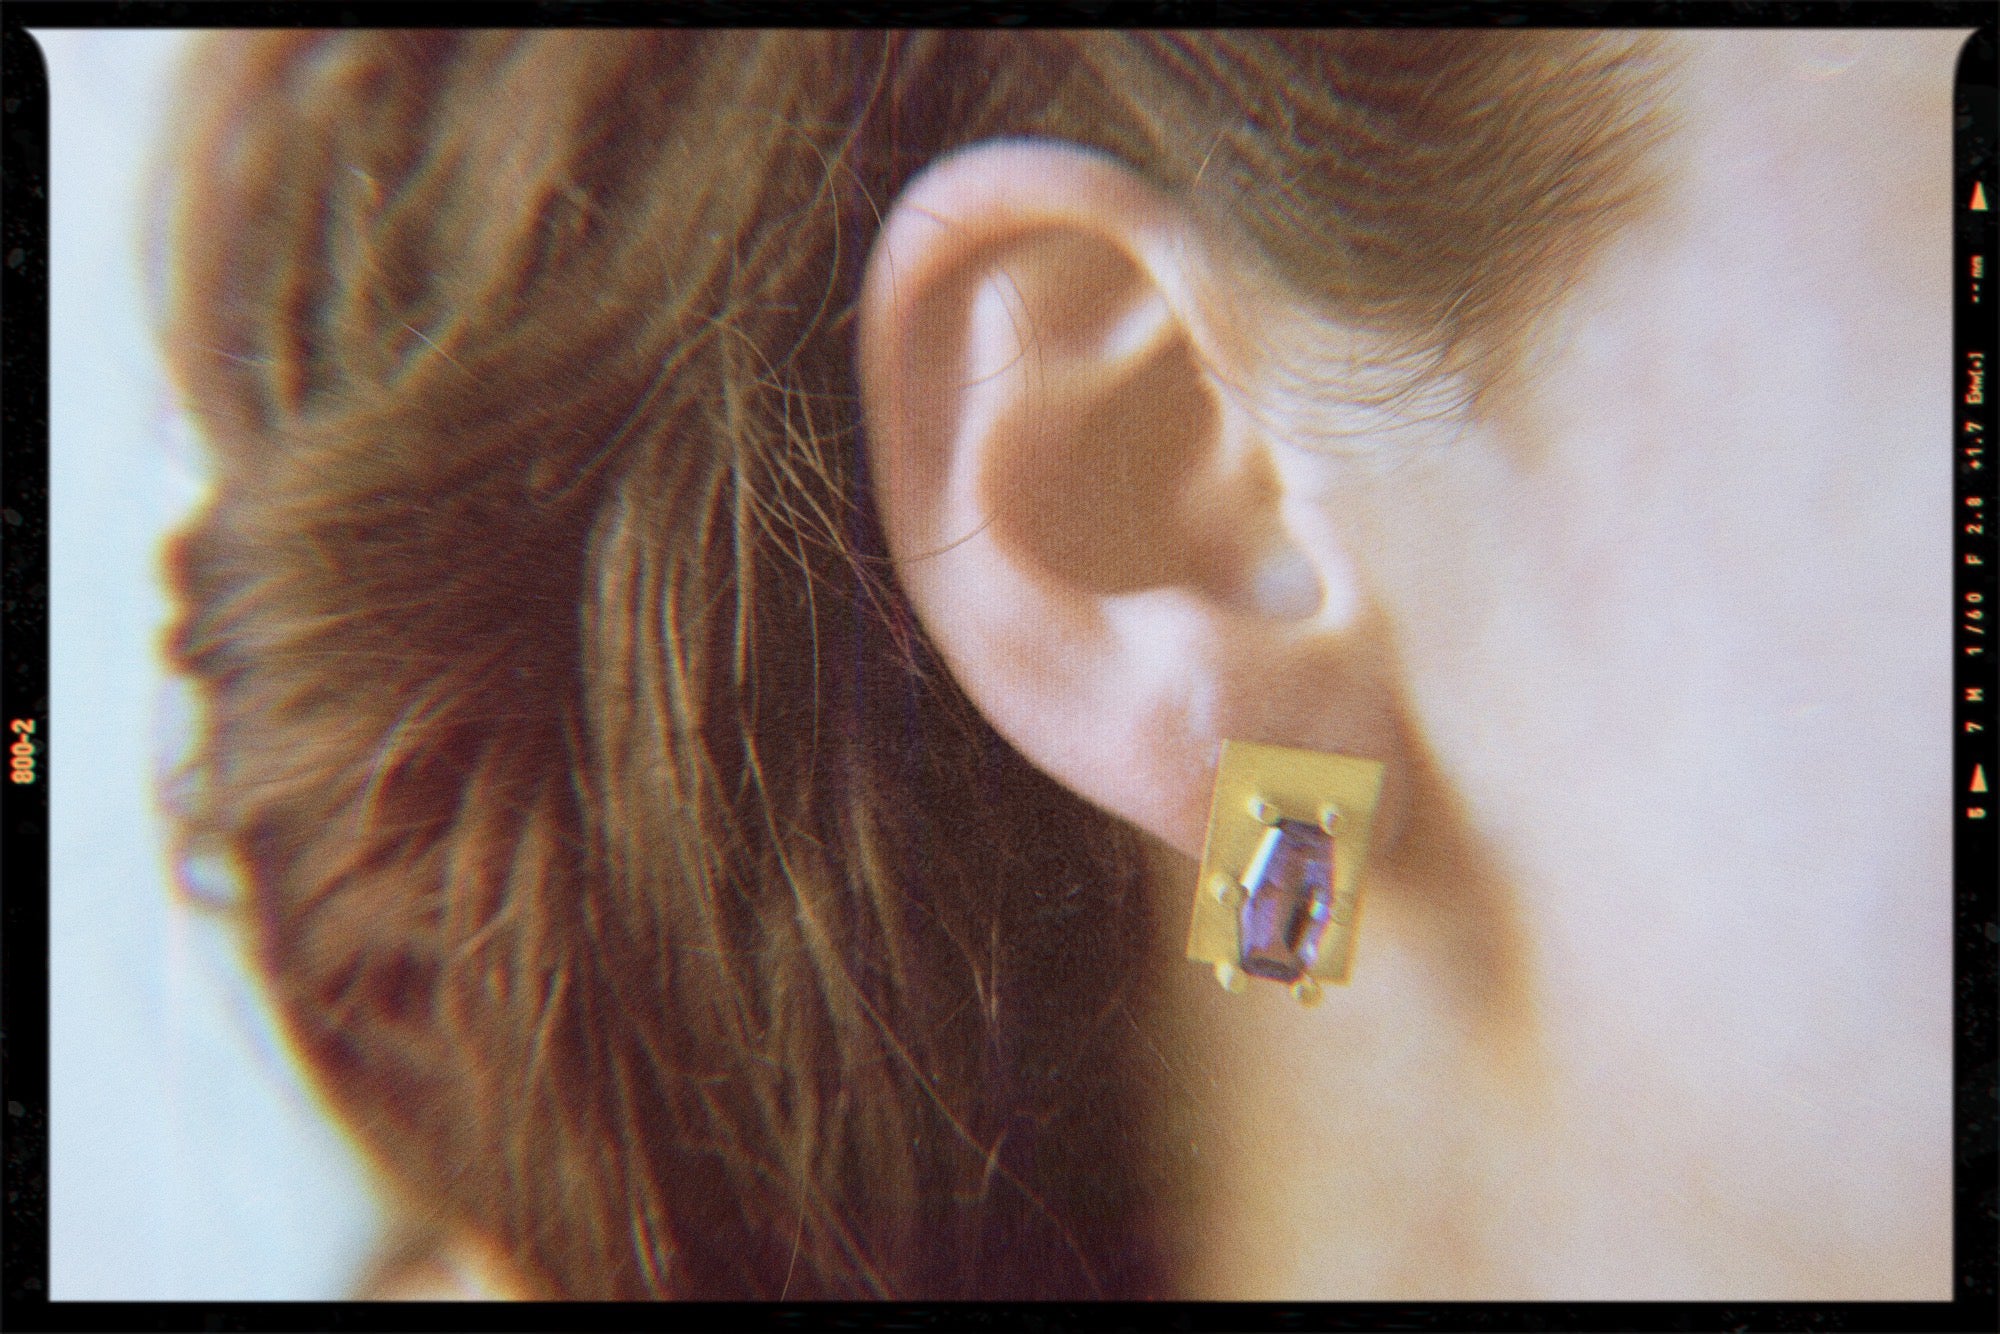 Auralandi earrings in 19.2 Karat Gold with fancy hexagon cut amethysts, won by model Antonia Grant, photographed by Benjamin Jones. The extensive art collection housed in the Palazzo Doria Pamphilj in Rome, visited by Hugo since early youth, led him to create something unique after his grandmother Aura.